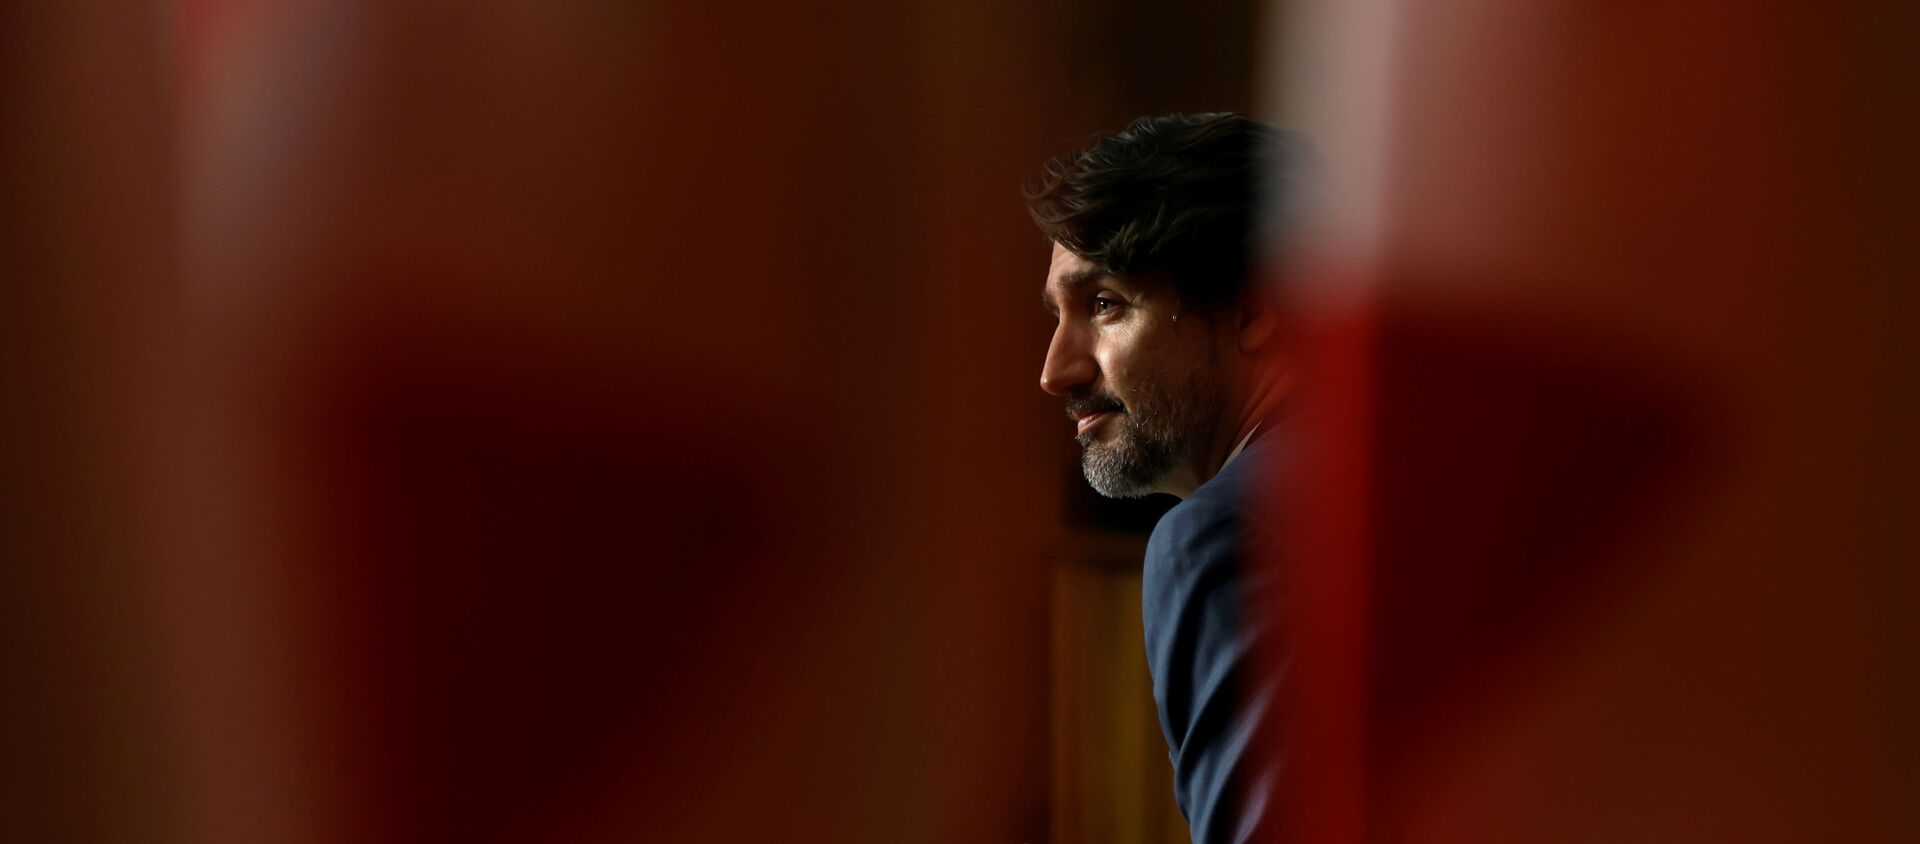 Canada's Prime Minister Justin Trudeau attends a news conference, as efforts continue to help slow the spread of the coronavirus disease (COVID-19), in Ottawa, Ontario, Canada May 18, 2021 - Sputnik International, 1920, 18.05.2021